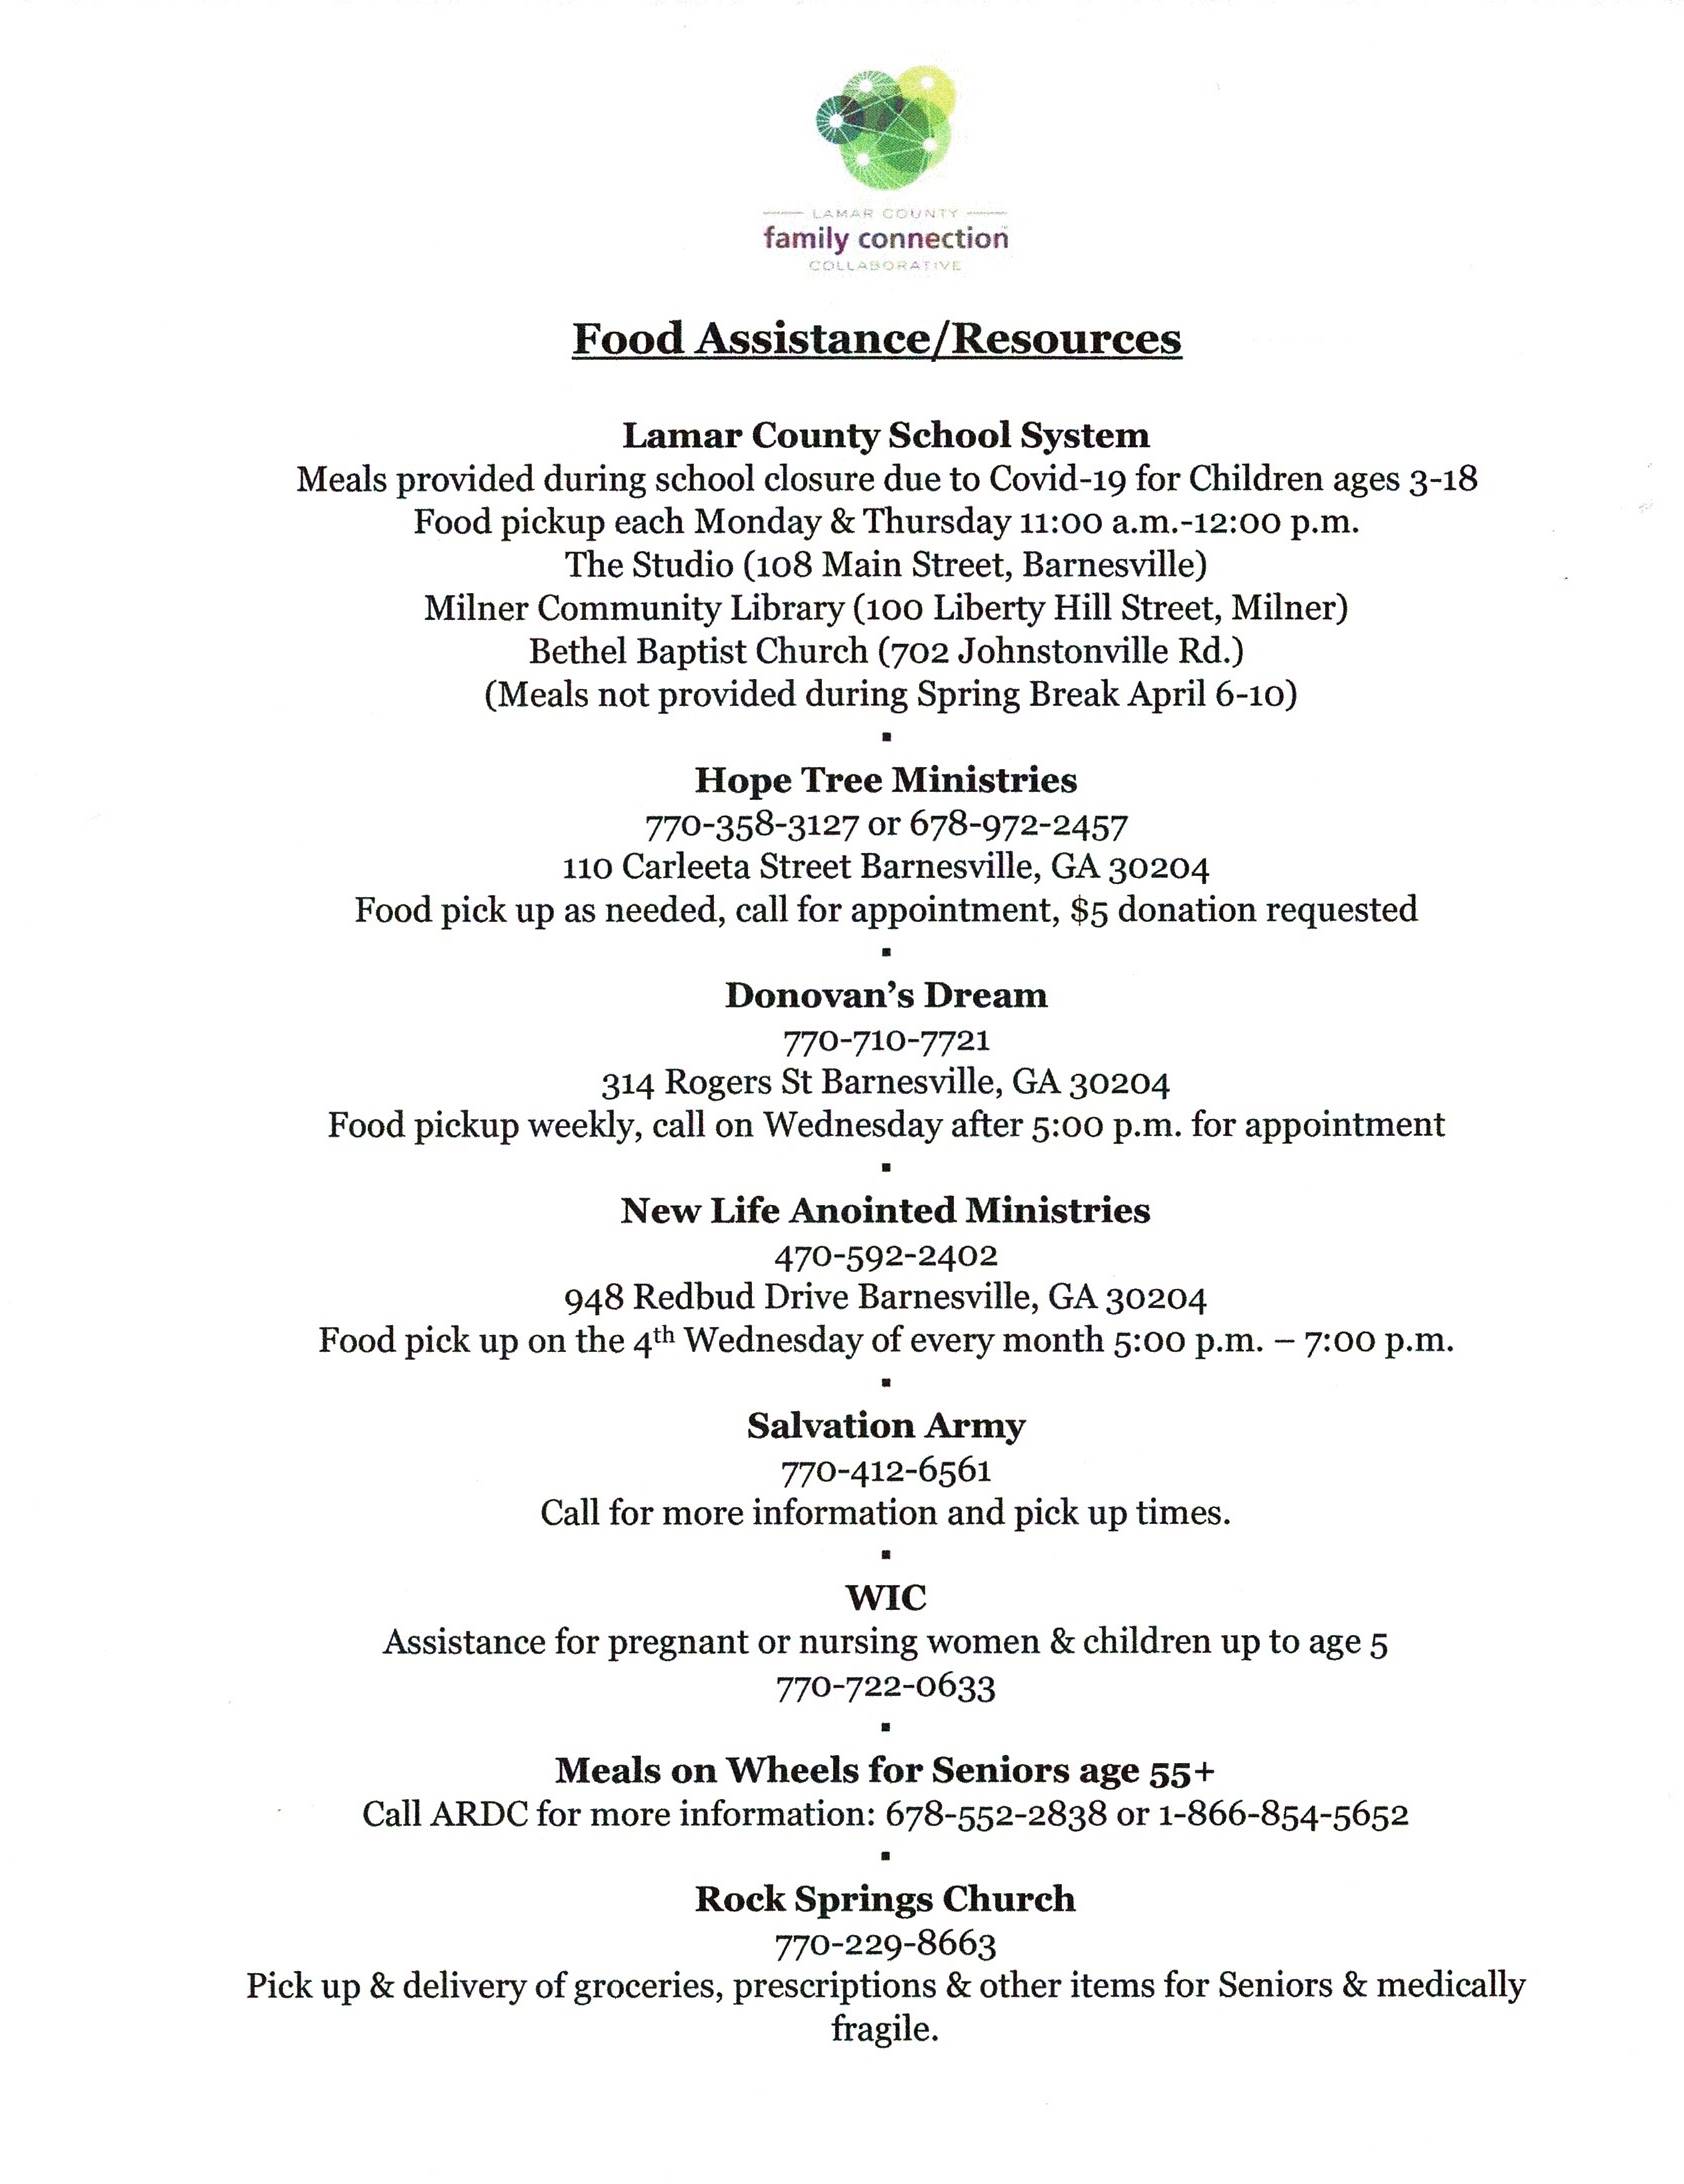 Food Assistance and Resources